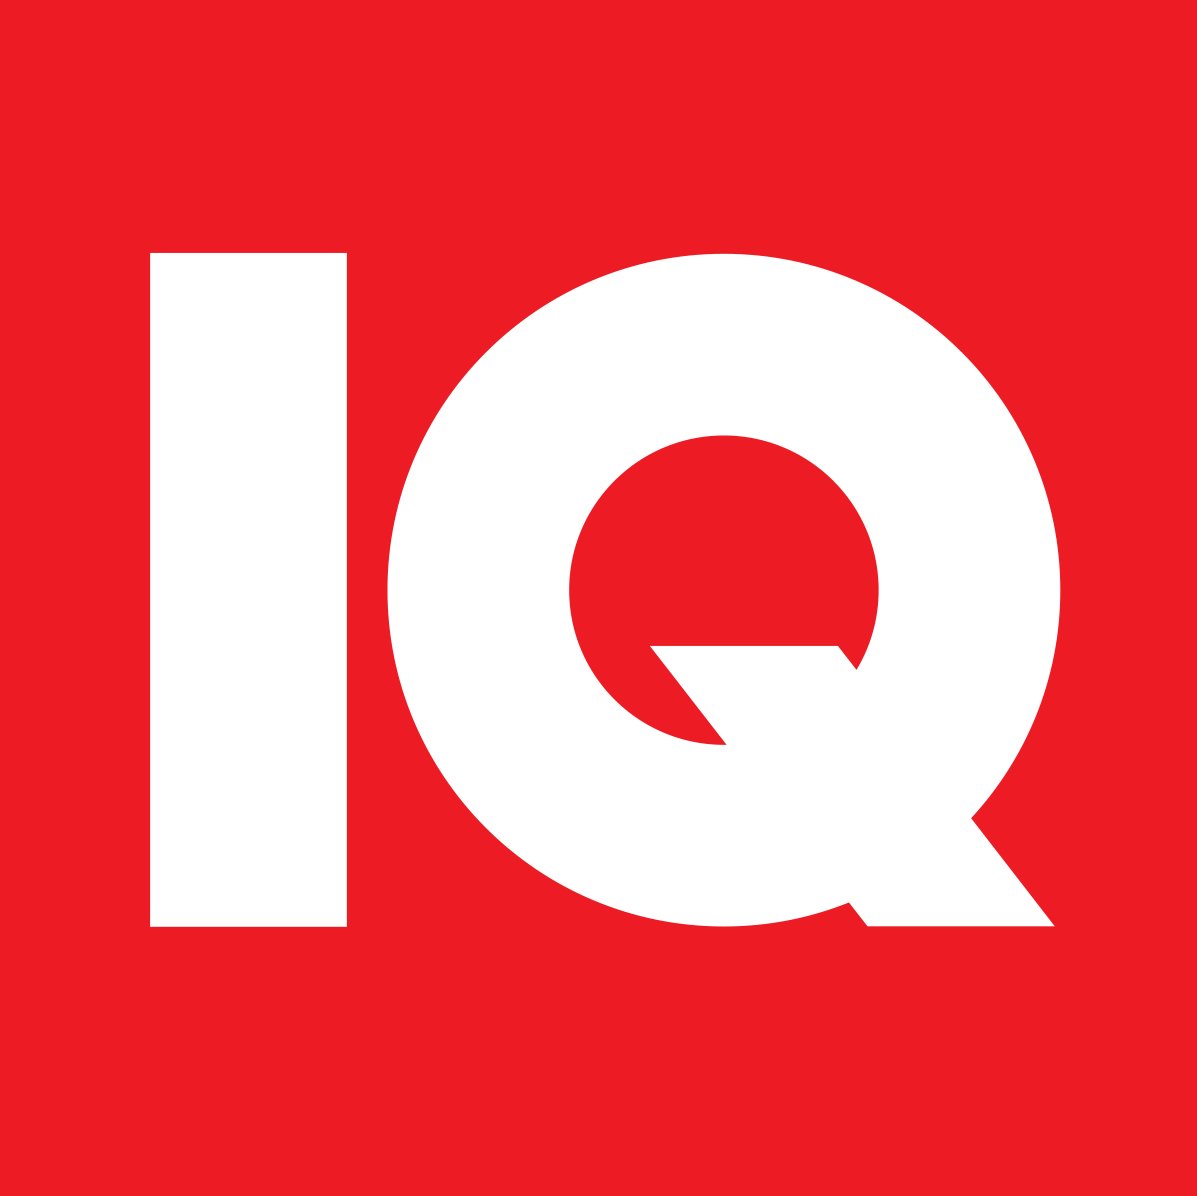 IQ is an analytical monthly magazine that takes an editorial glance on politics, economics and culture.